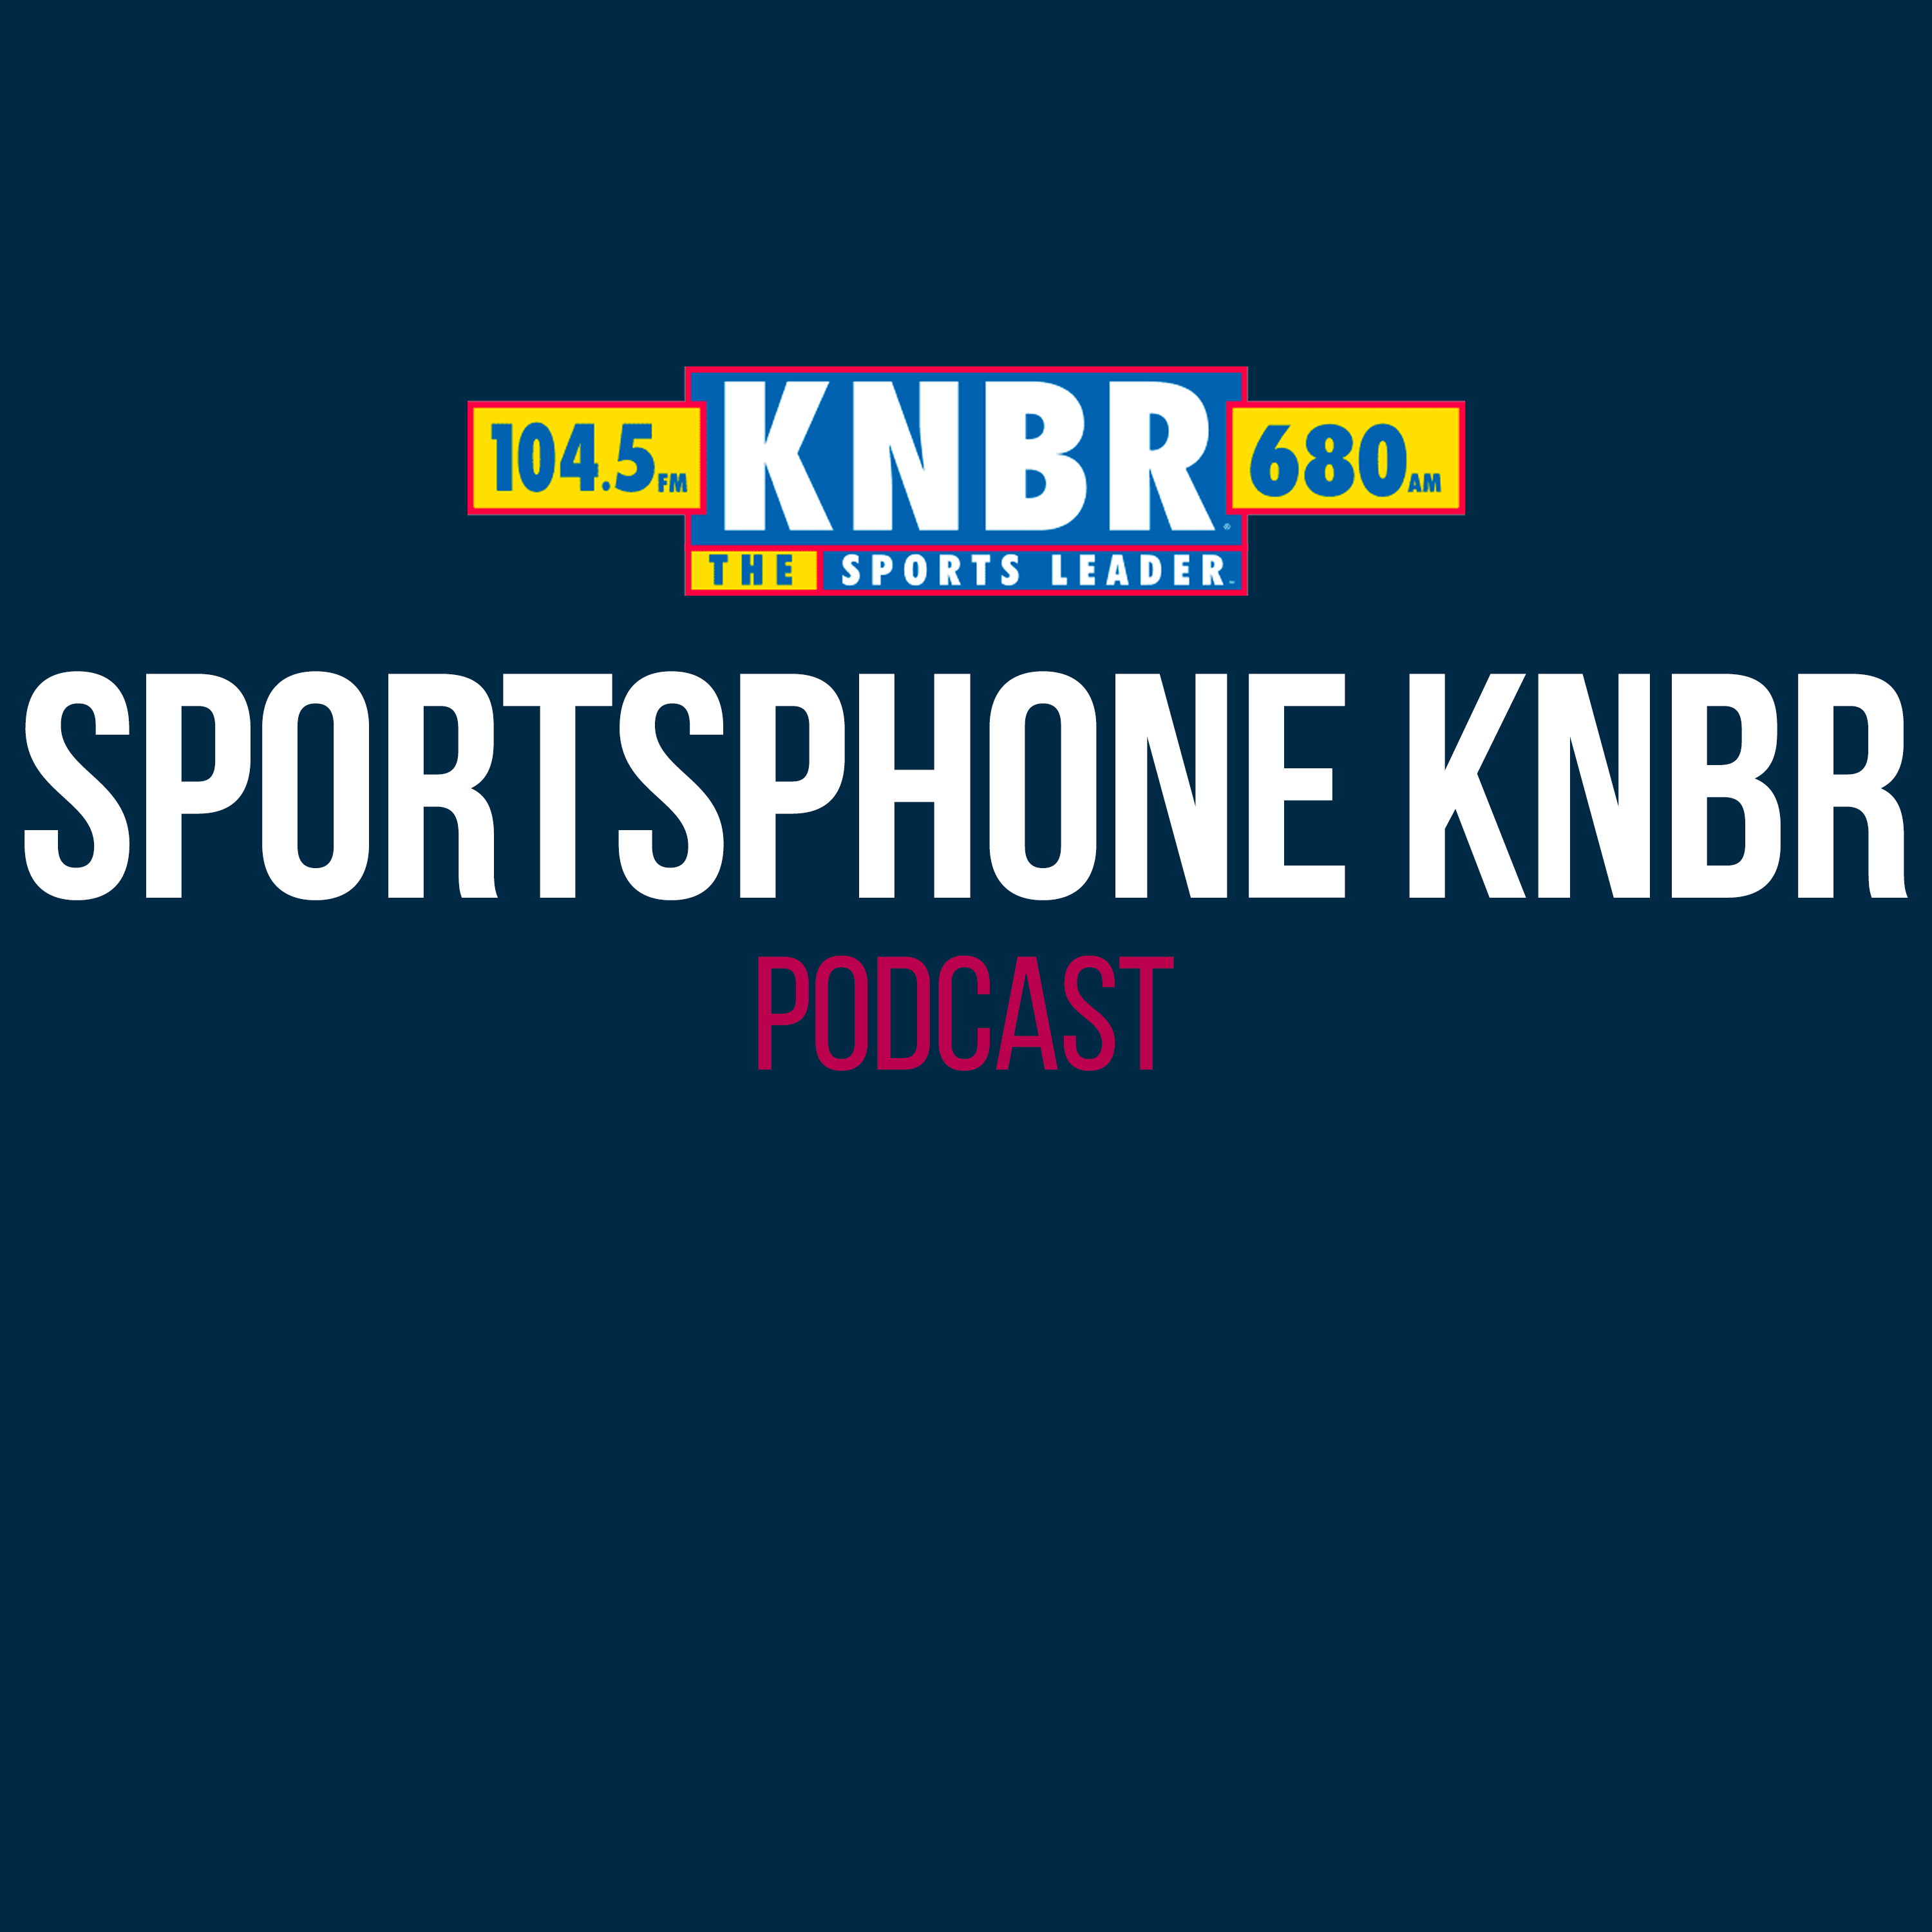 5-6 Marc Delucchi joins Dieter on Sportsphone KNBR to discuss the Giants' recent offensive woes